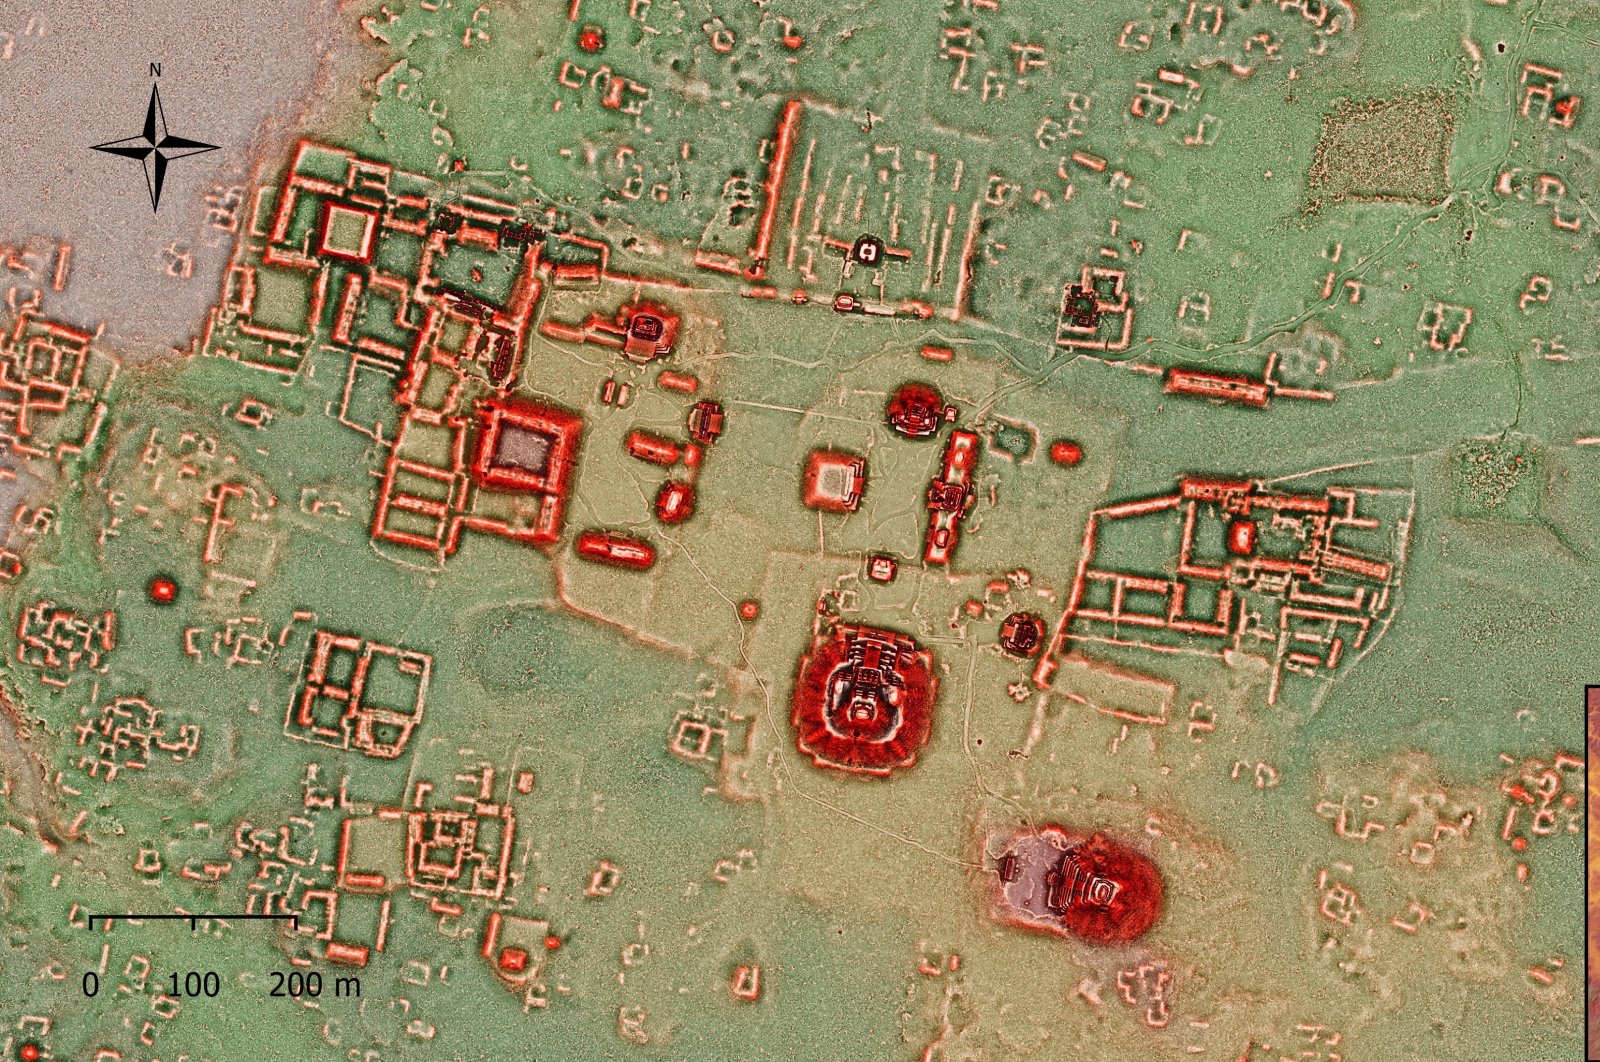 A graphic illustrating new details, uncovered using LiDAR laser technology, of the ancient Mayan city of Calakmul, Mexico, in this undated handout image. (Reuters Photo)